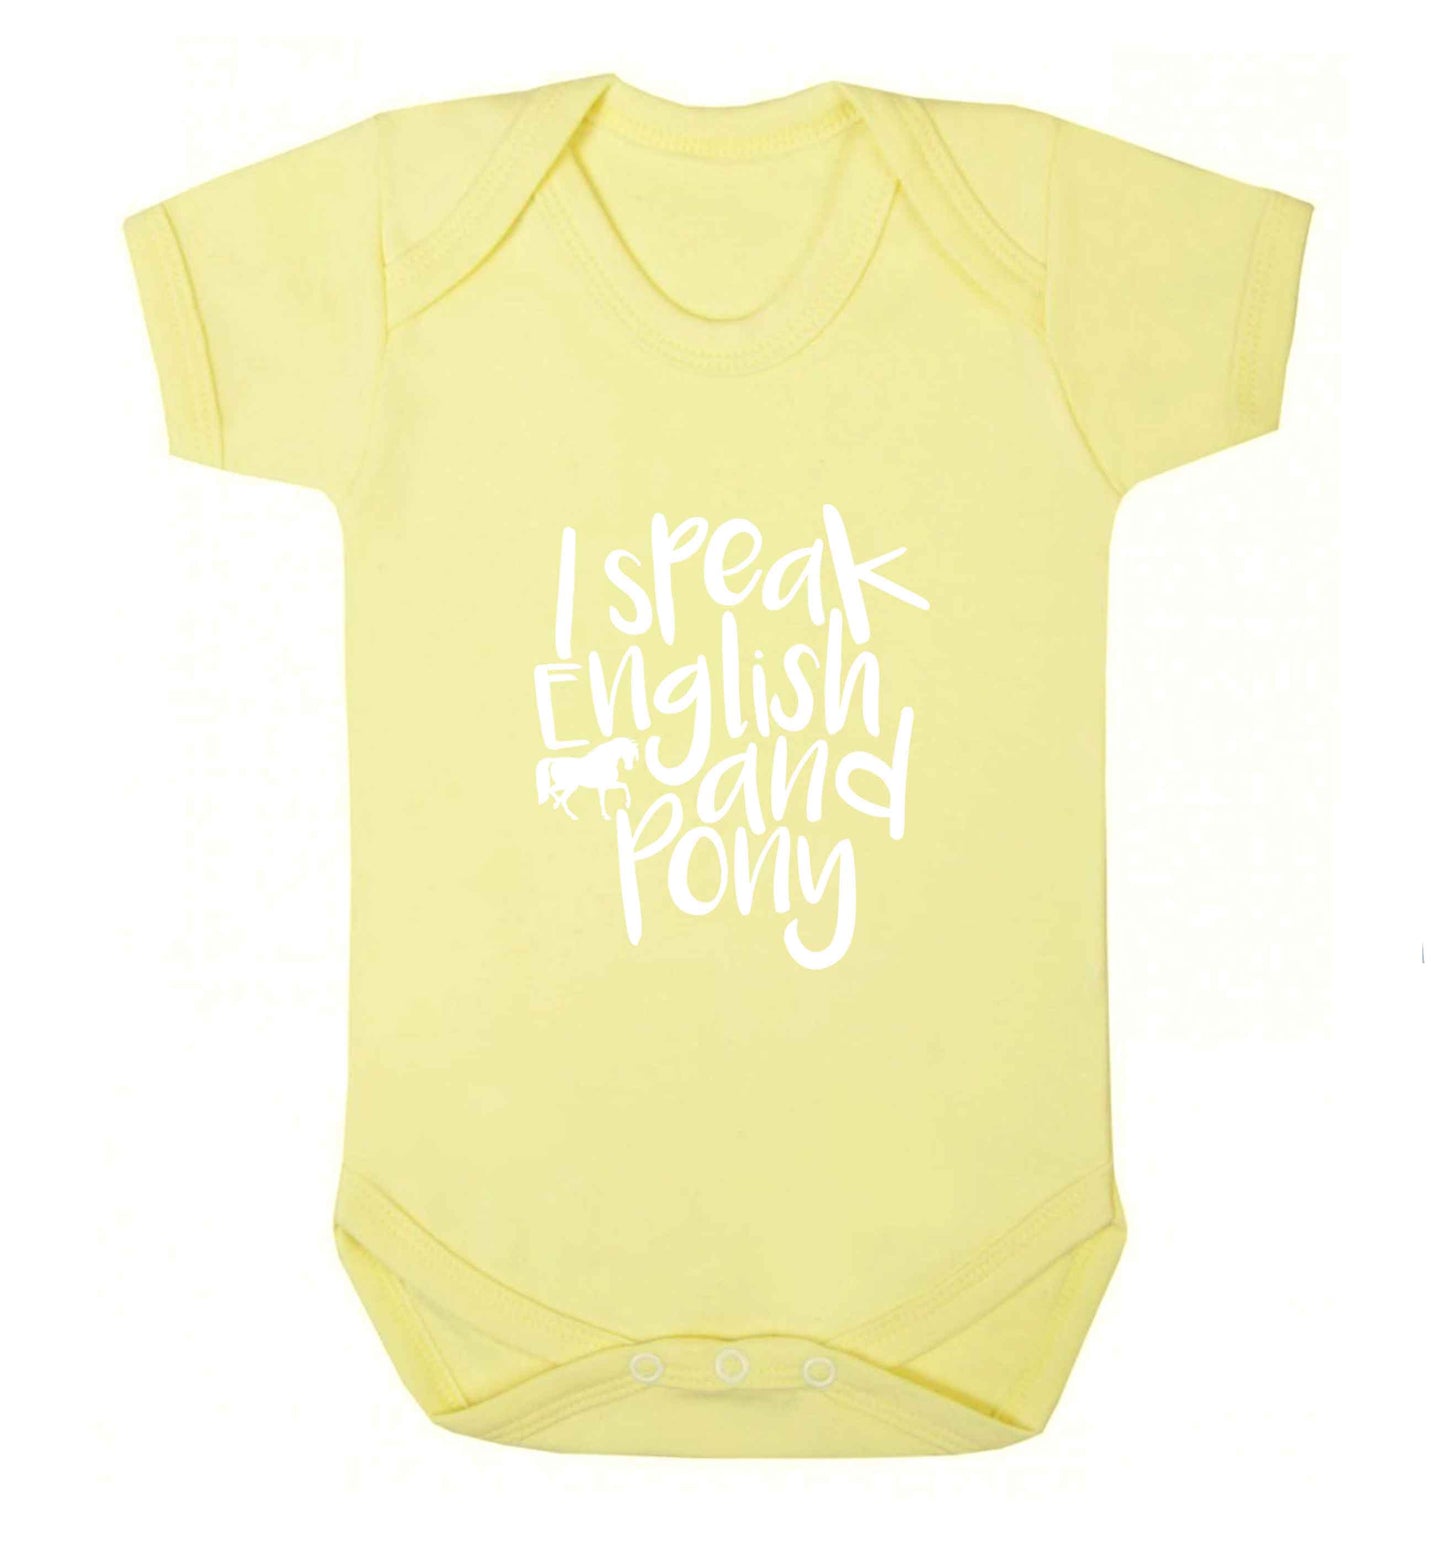 I speak English and pony baby vest pale yellow 18-24 months